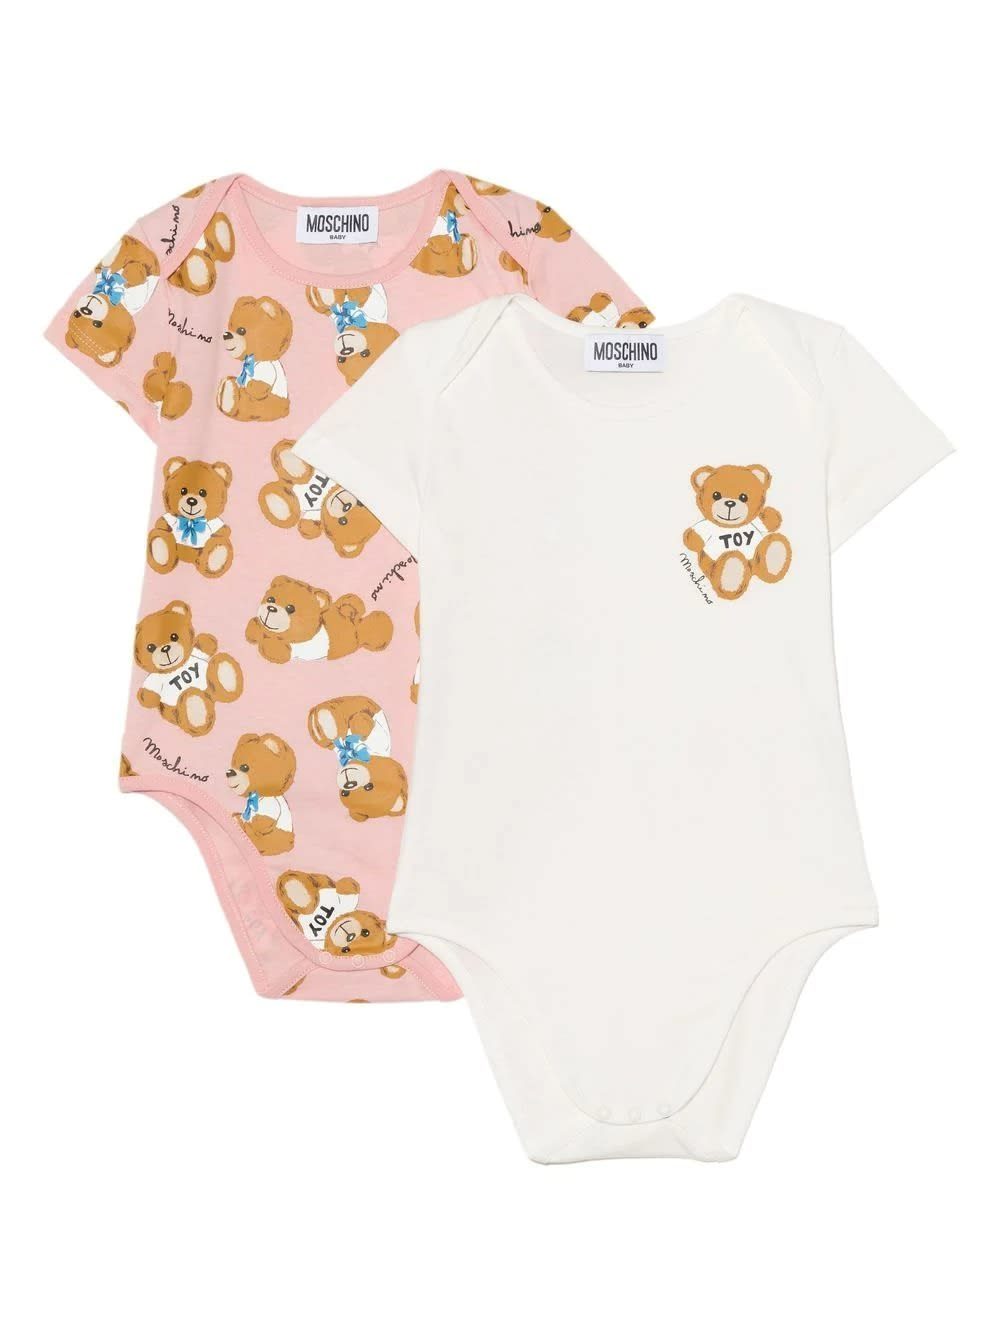 Moschino Set 2 Baby Bodysuits In White And Pink Cotton With Teddy Bear Print